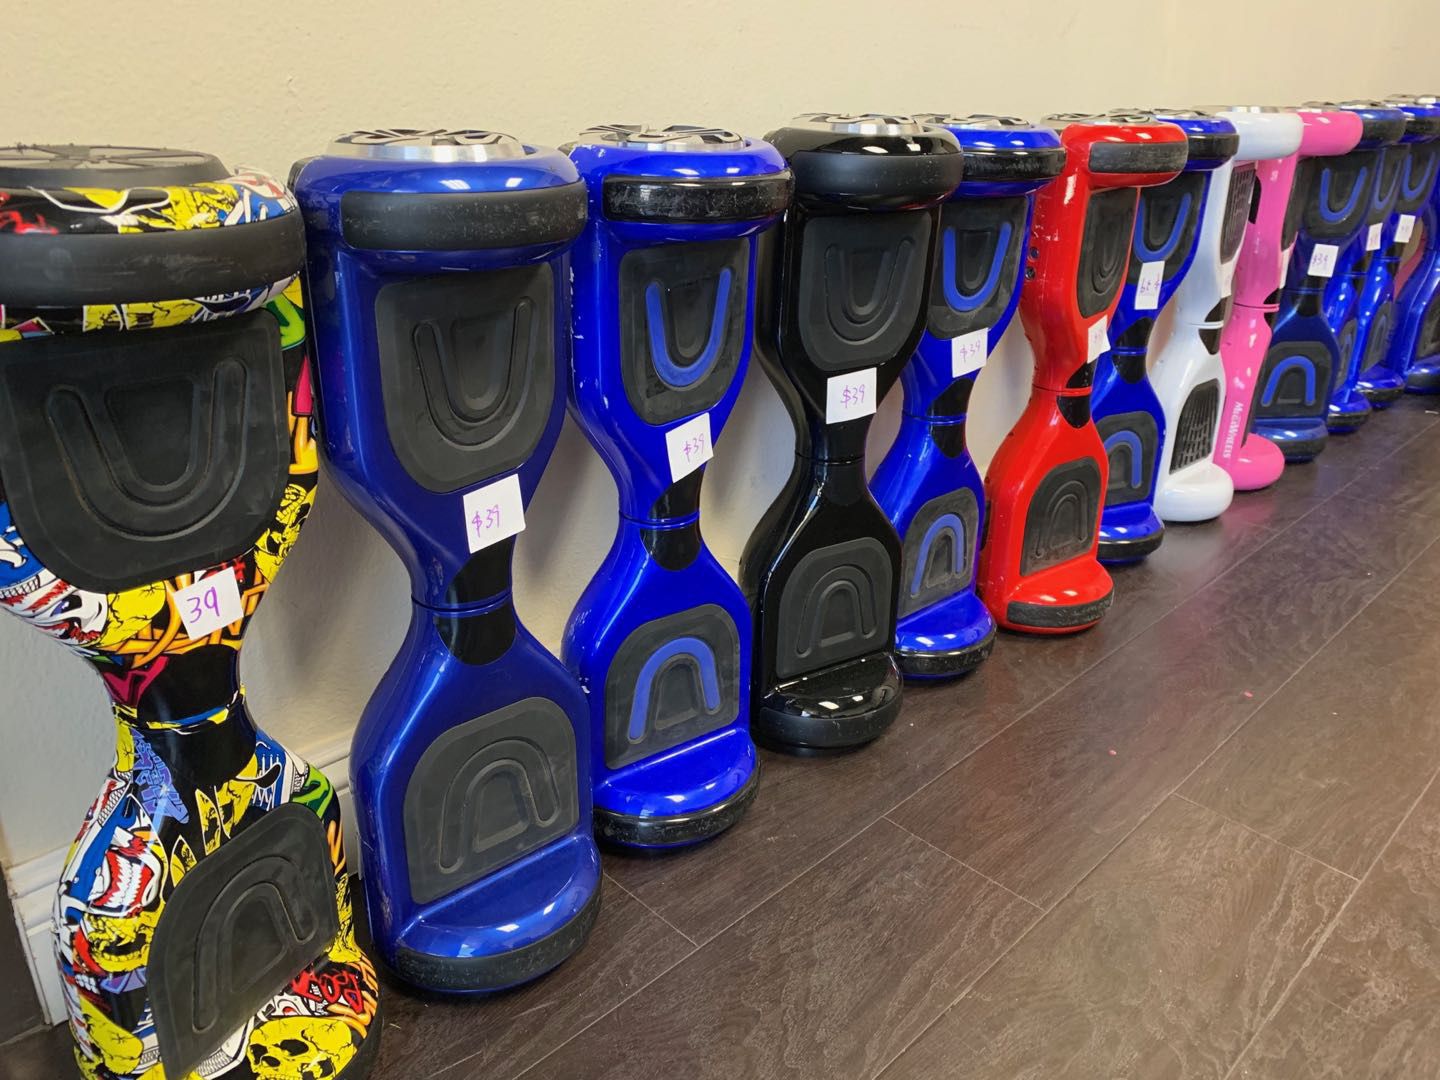 Cheap Hoverboards $39 all perfect working condition factory clearance price sale